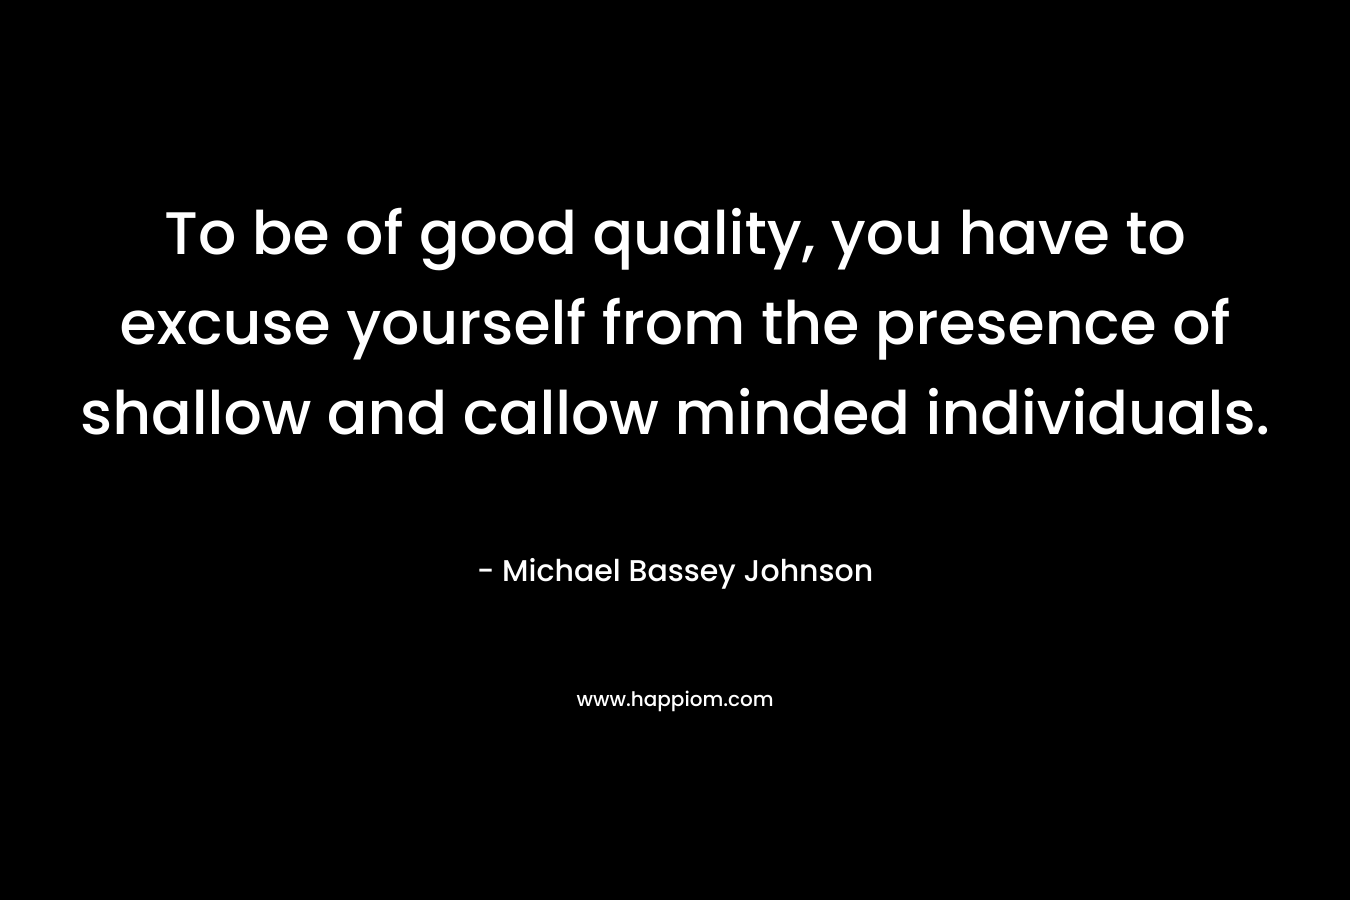 To be of good quality, you have to excuse yourself from the presence of shallow and callow minded individuals.